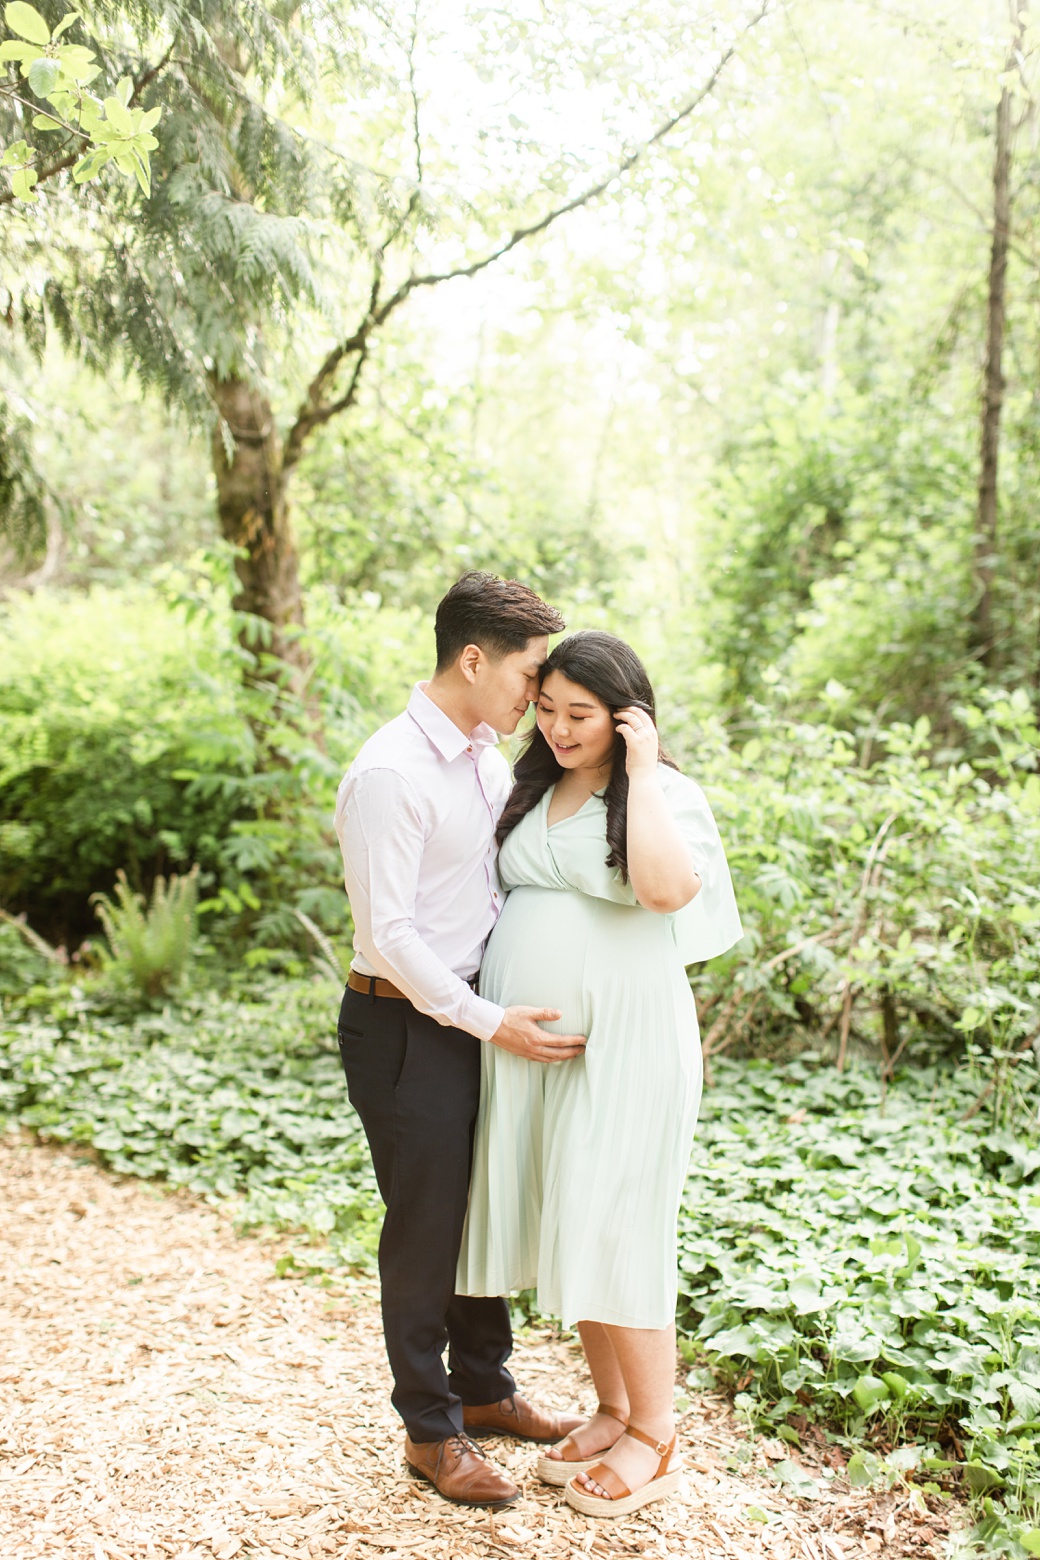 Seattle maternity session surrounded by greenery